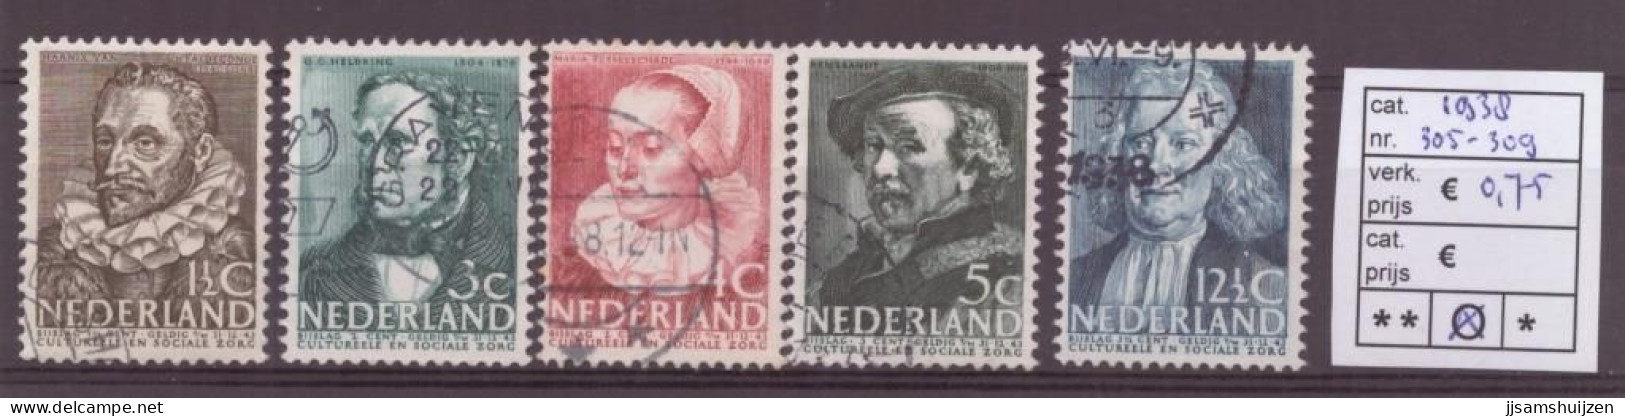 Netherlands Stamps Used 1938,  NVPH Number 305-309, See Scan For The Stamps - Used Stamps